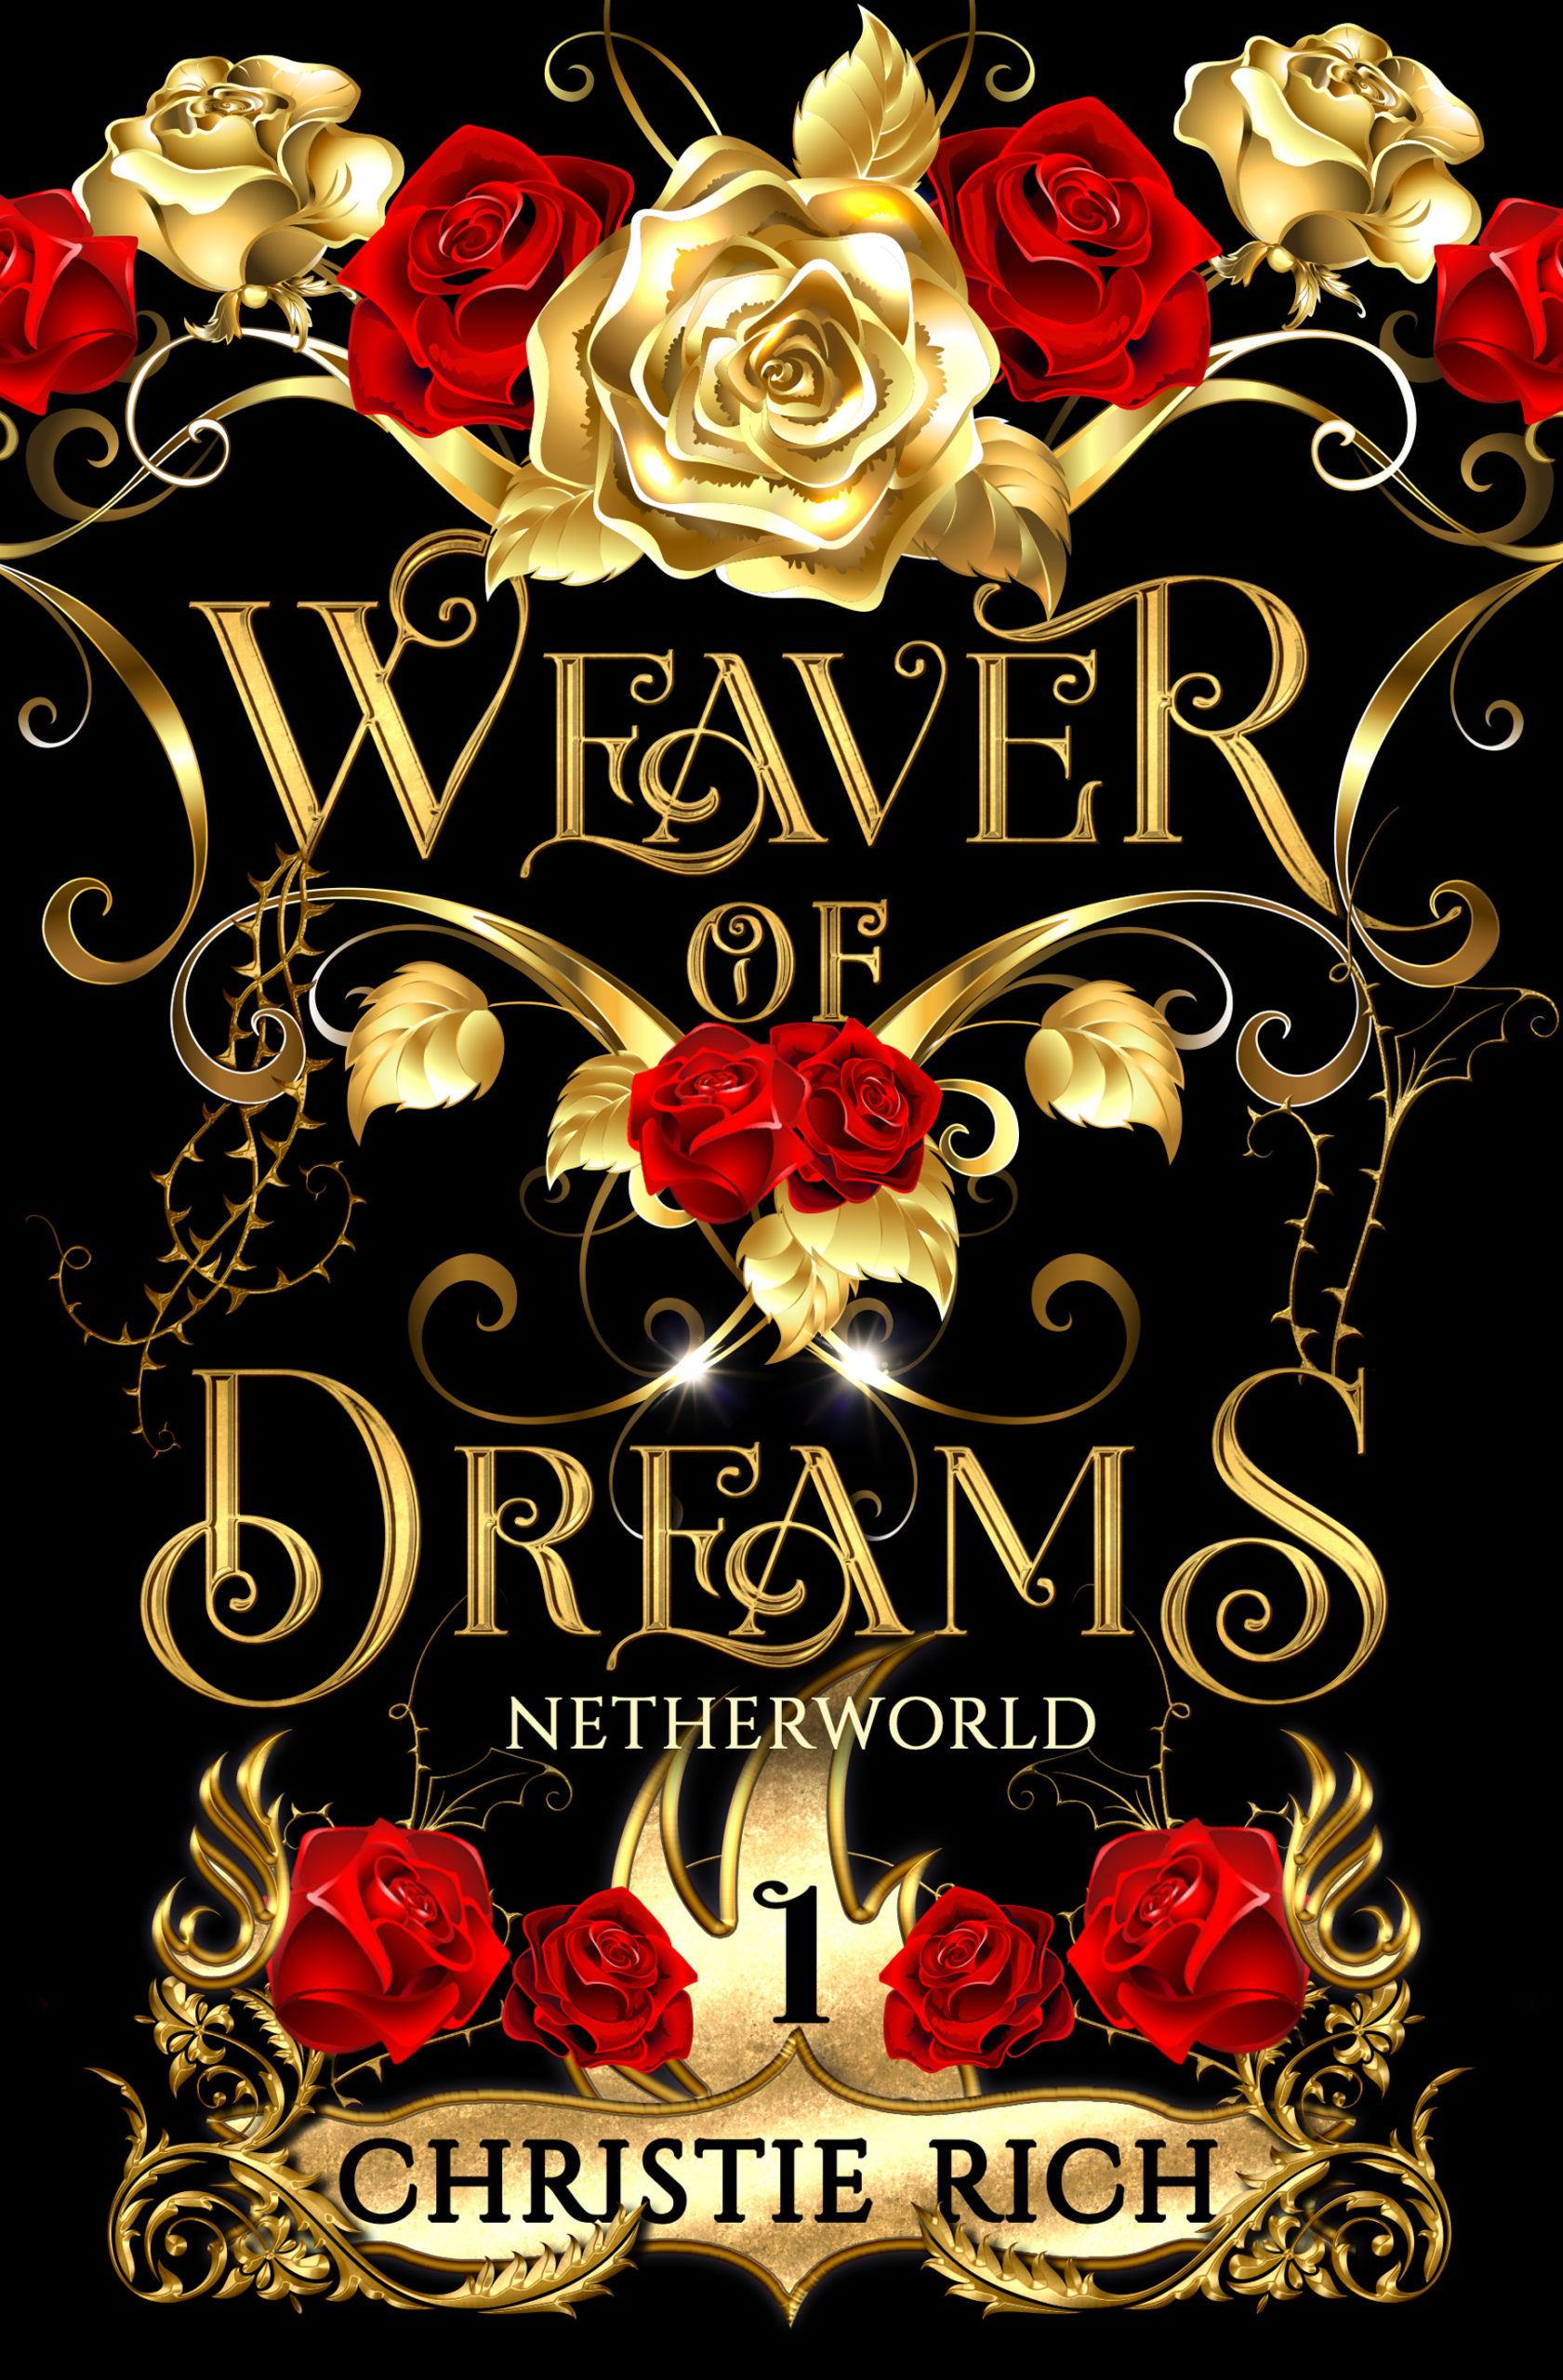 Book cover with gold text and red roses on a black background.